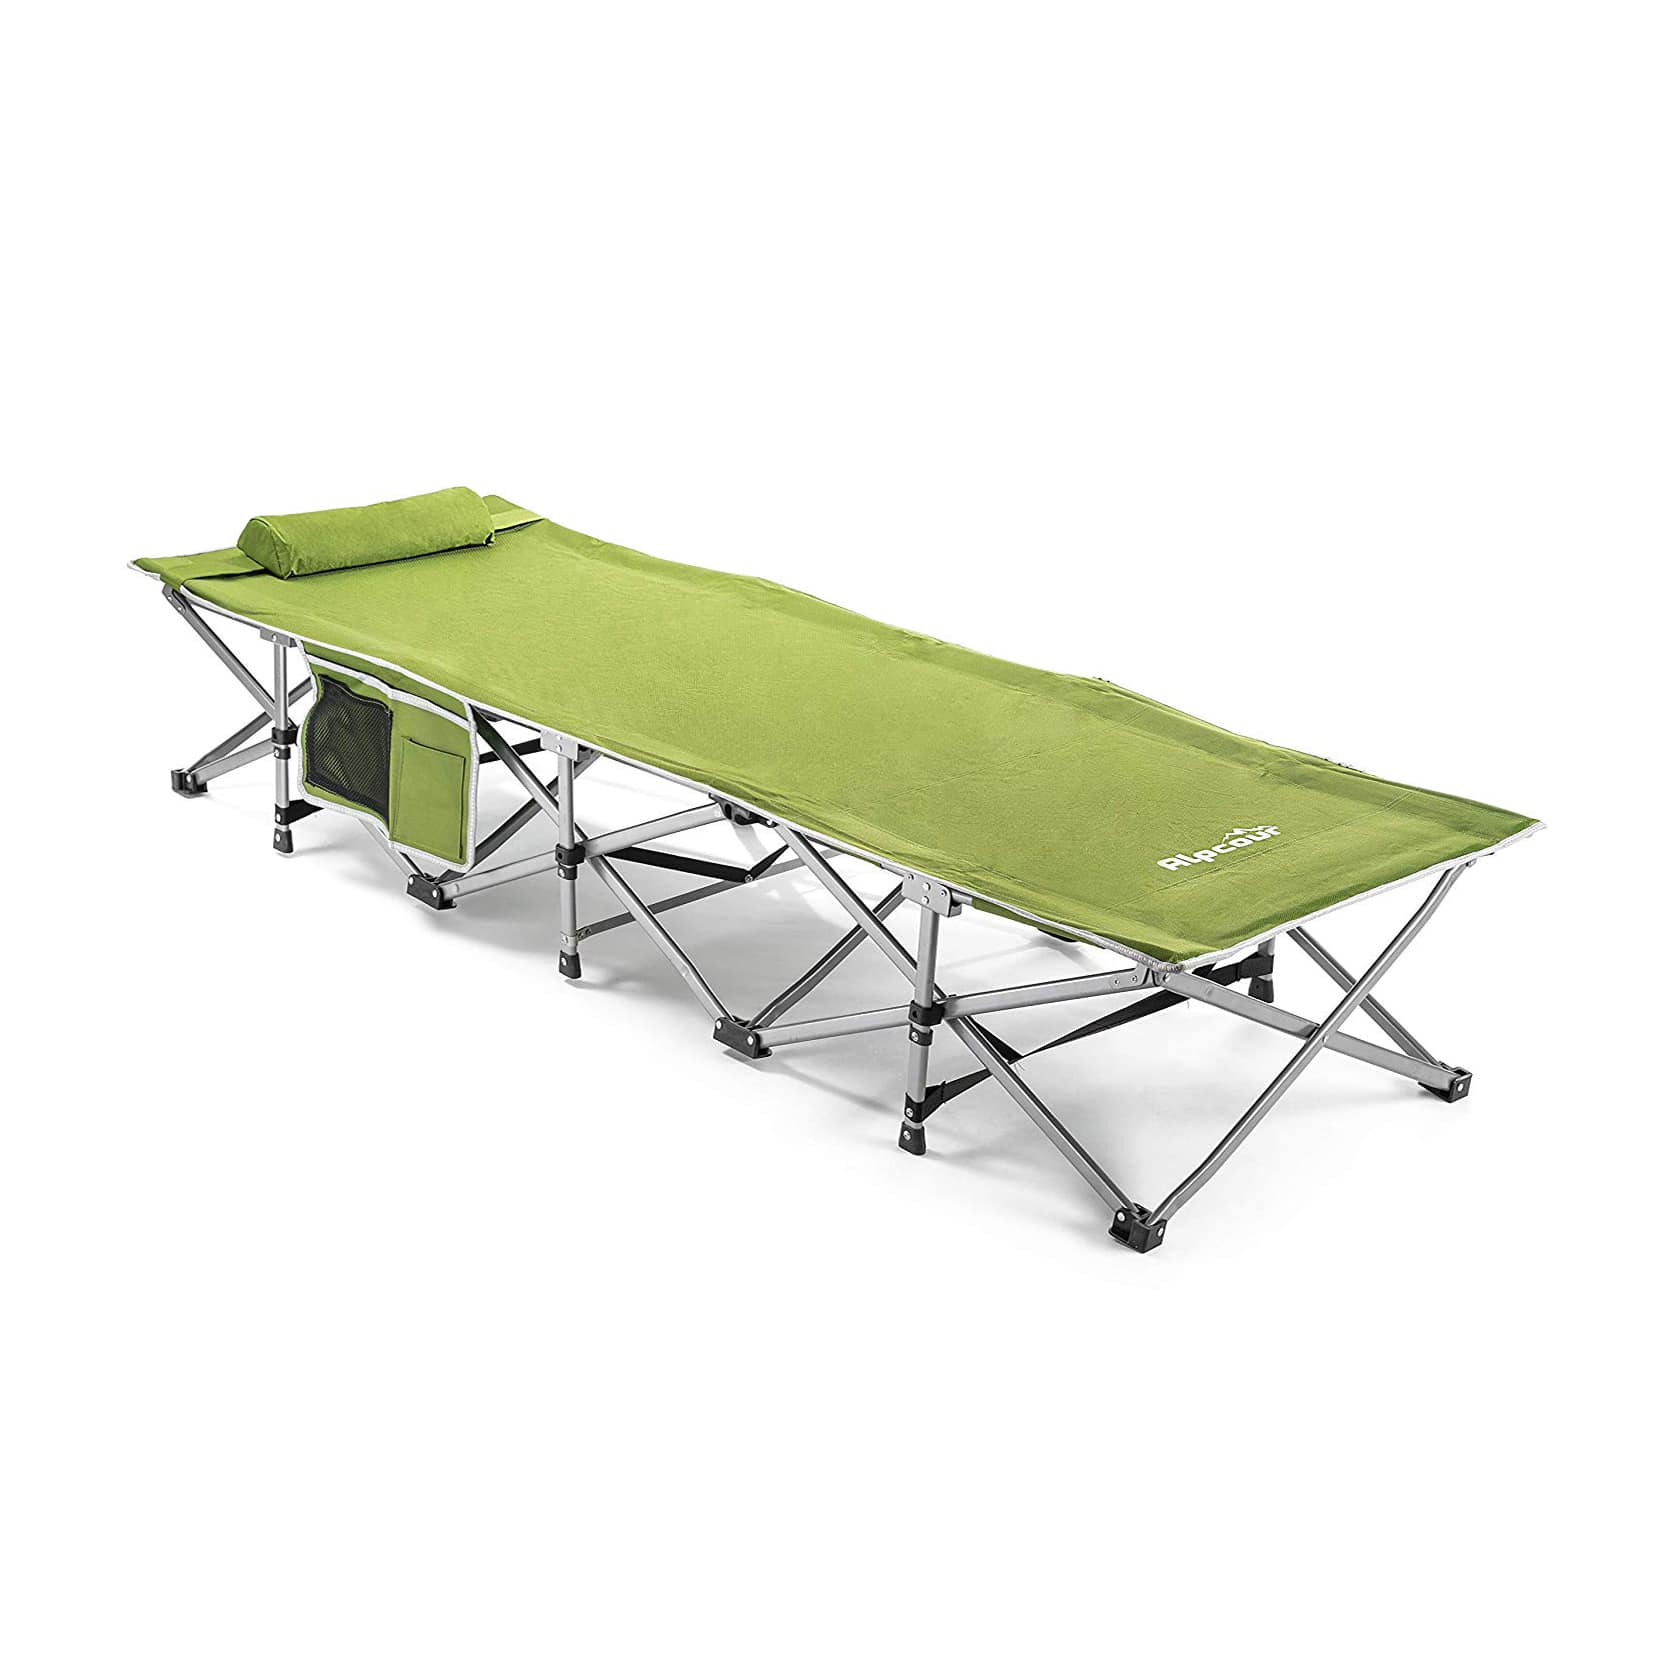 9. Alpcour Folding Camping Cot 